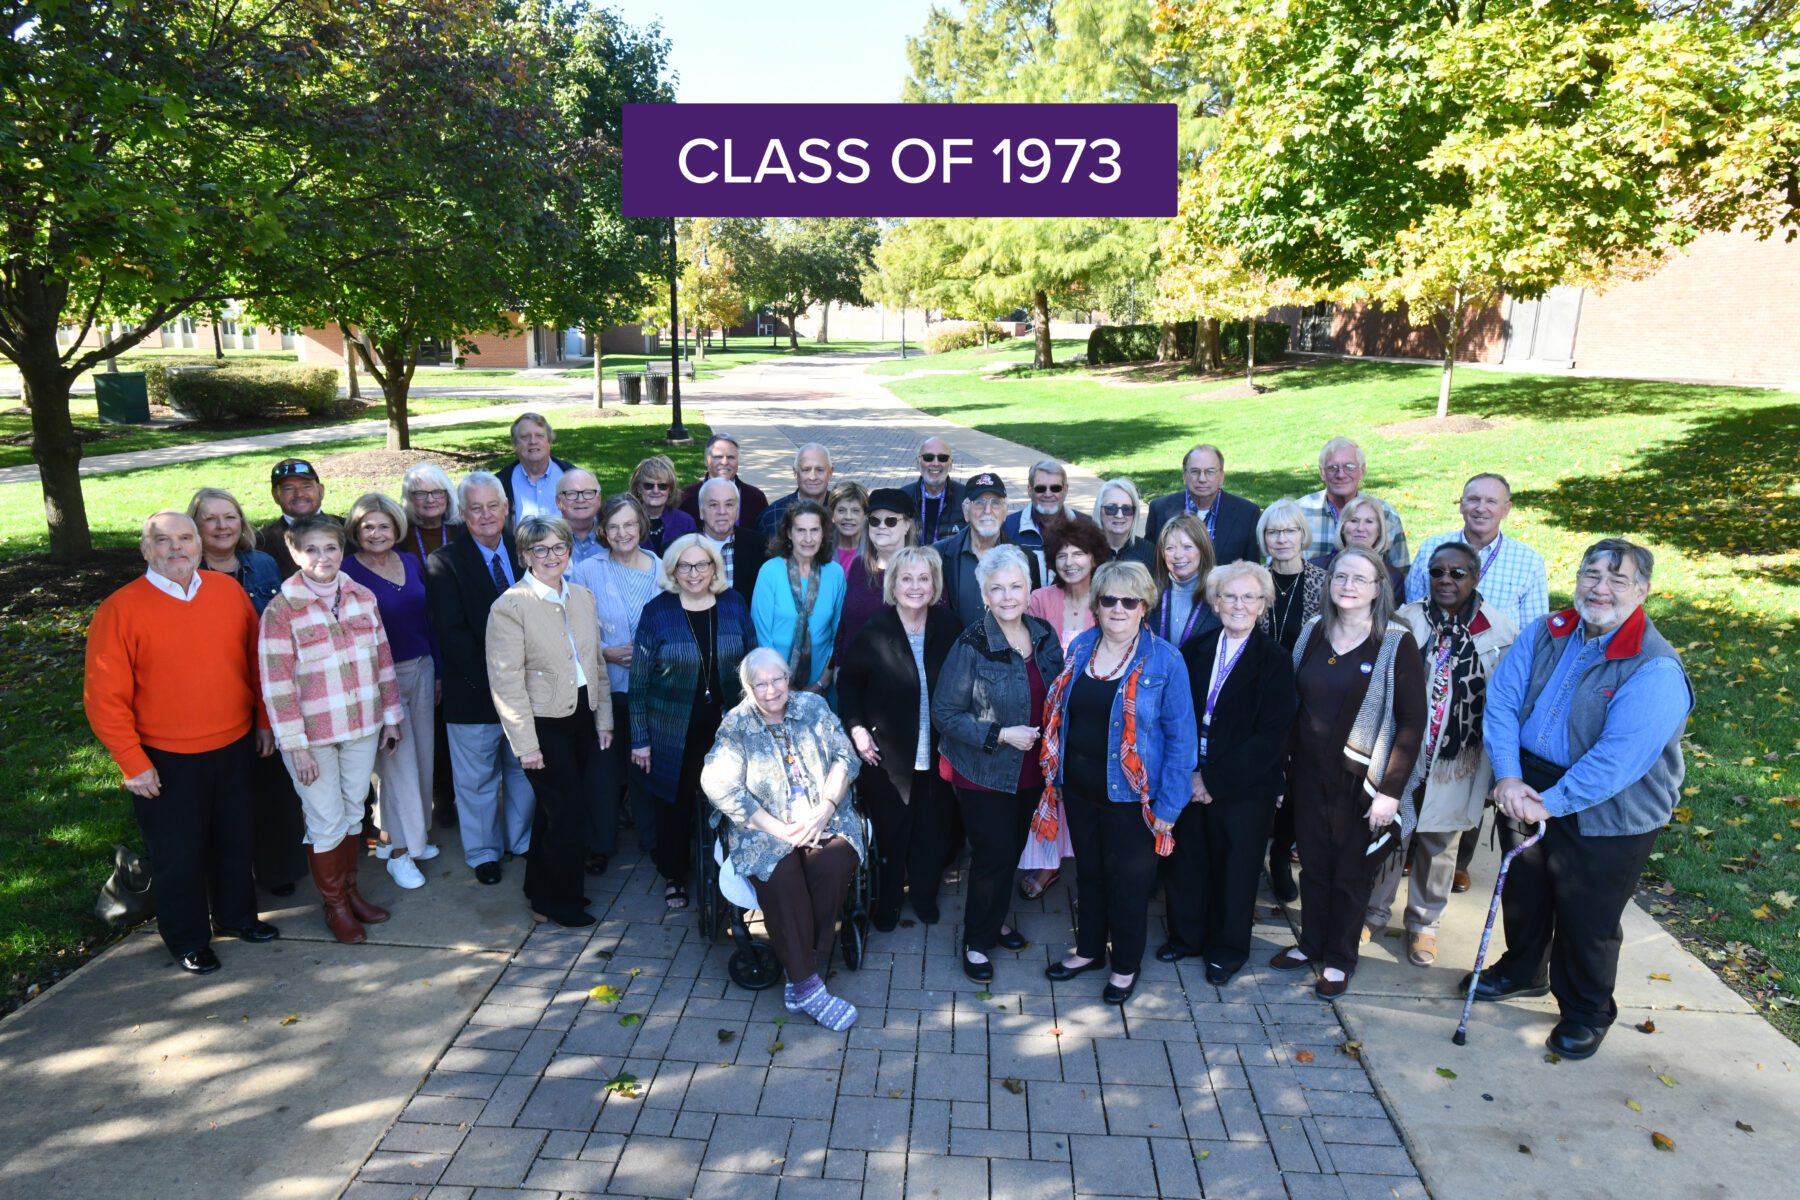 Those who came for the class reunion of 1973 pose for a group photo